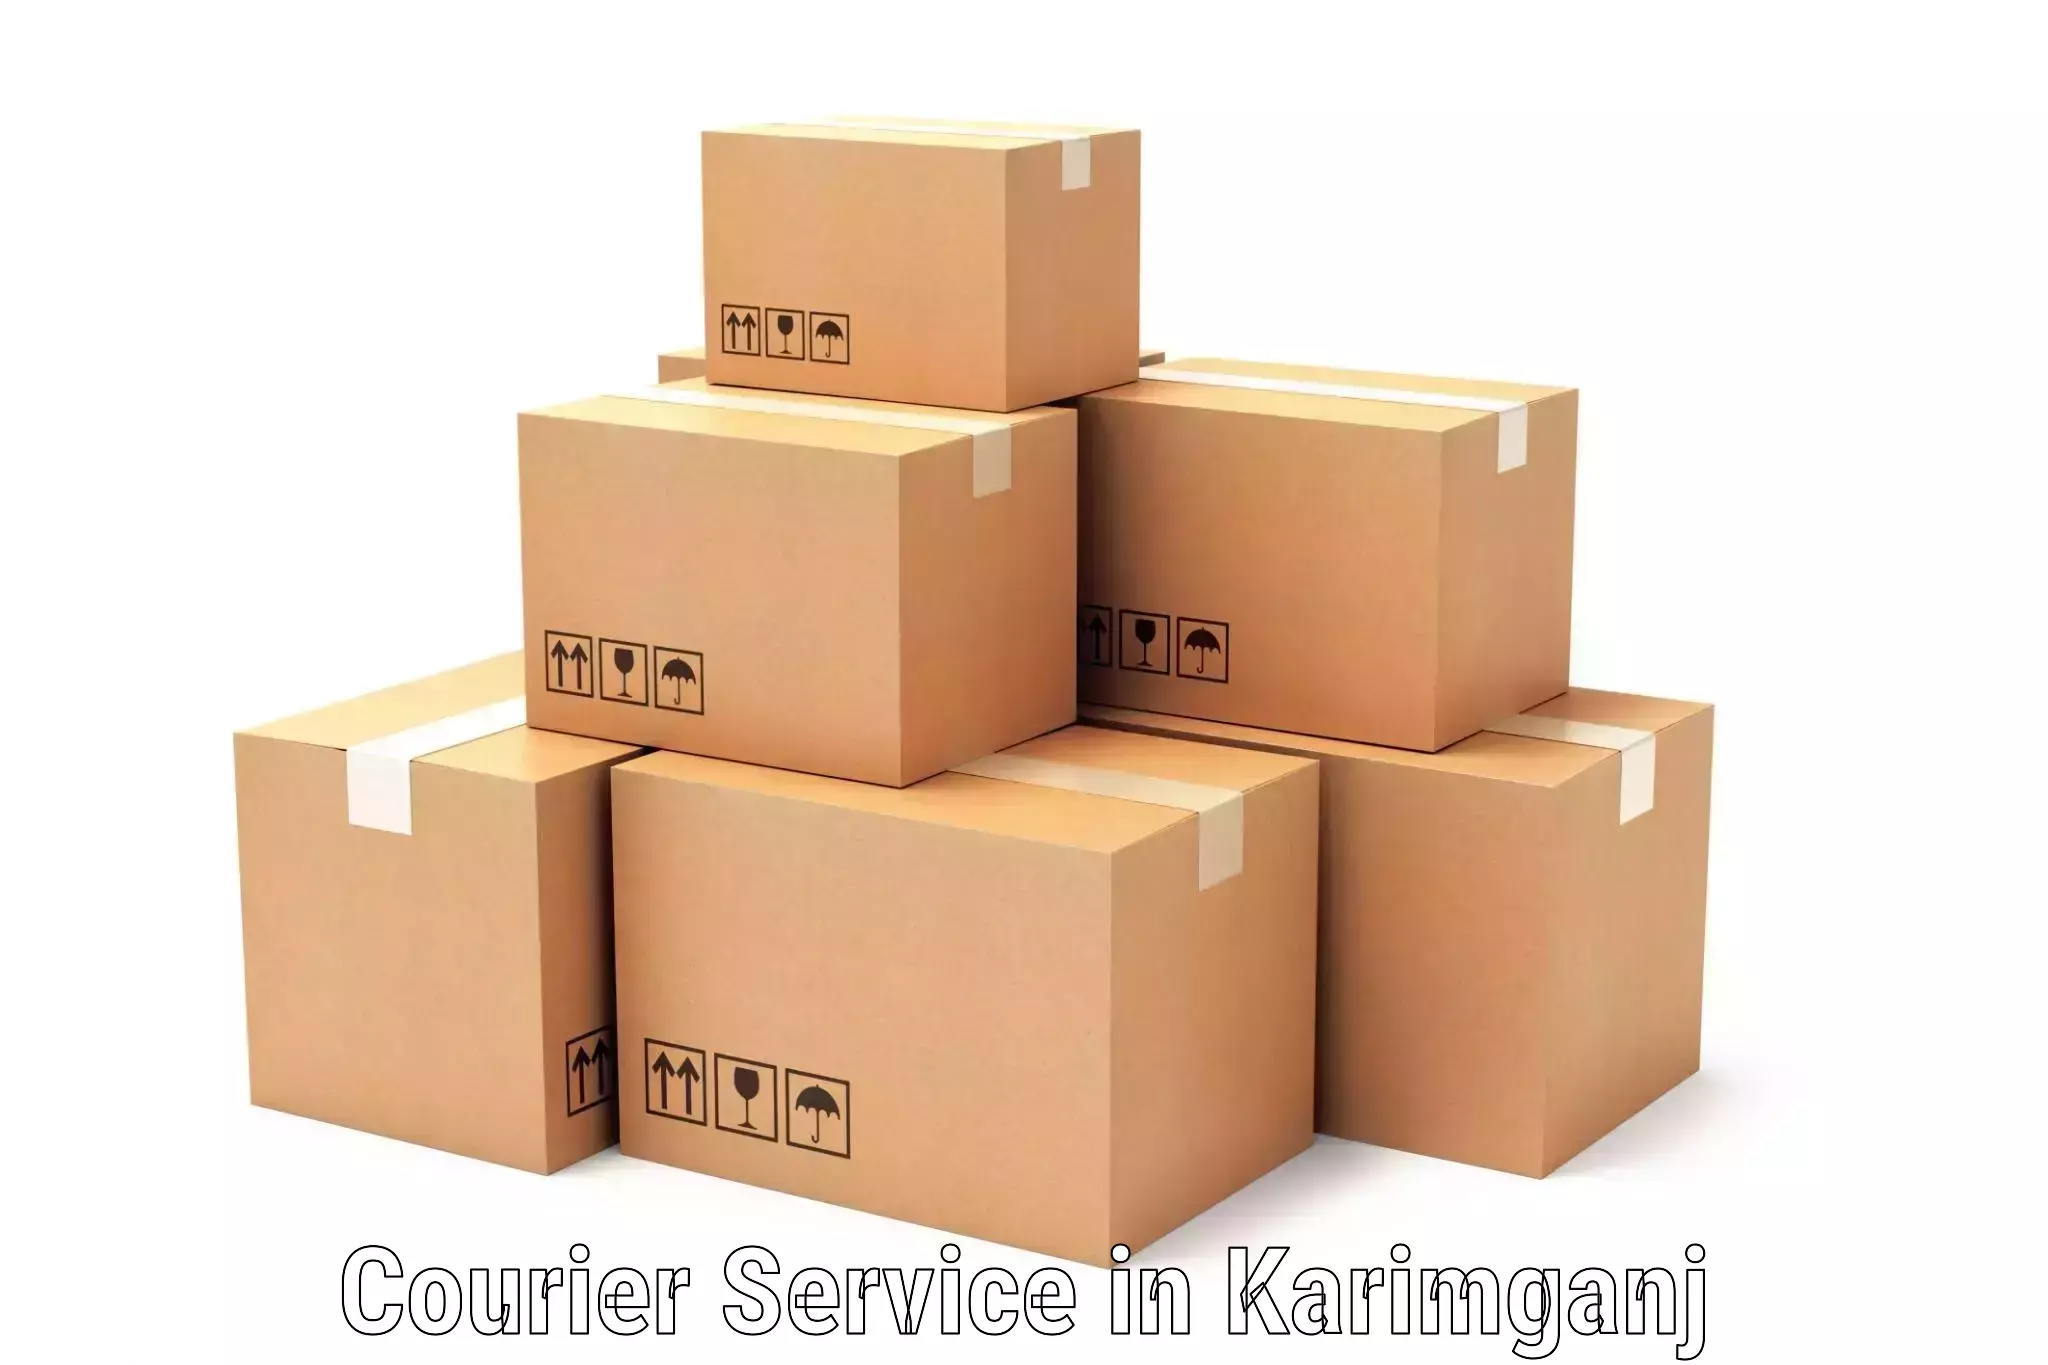 Customer-oriented courier services in Karimganj